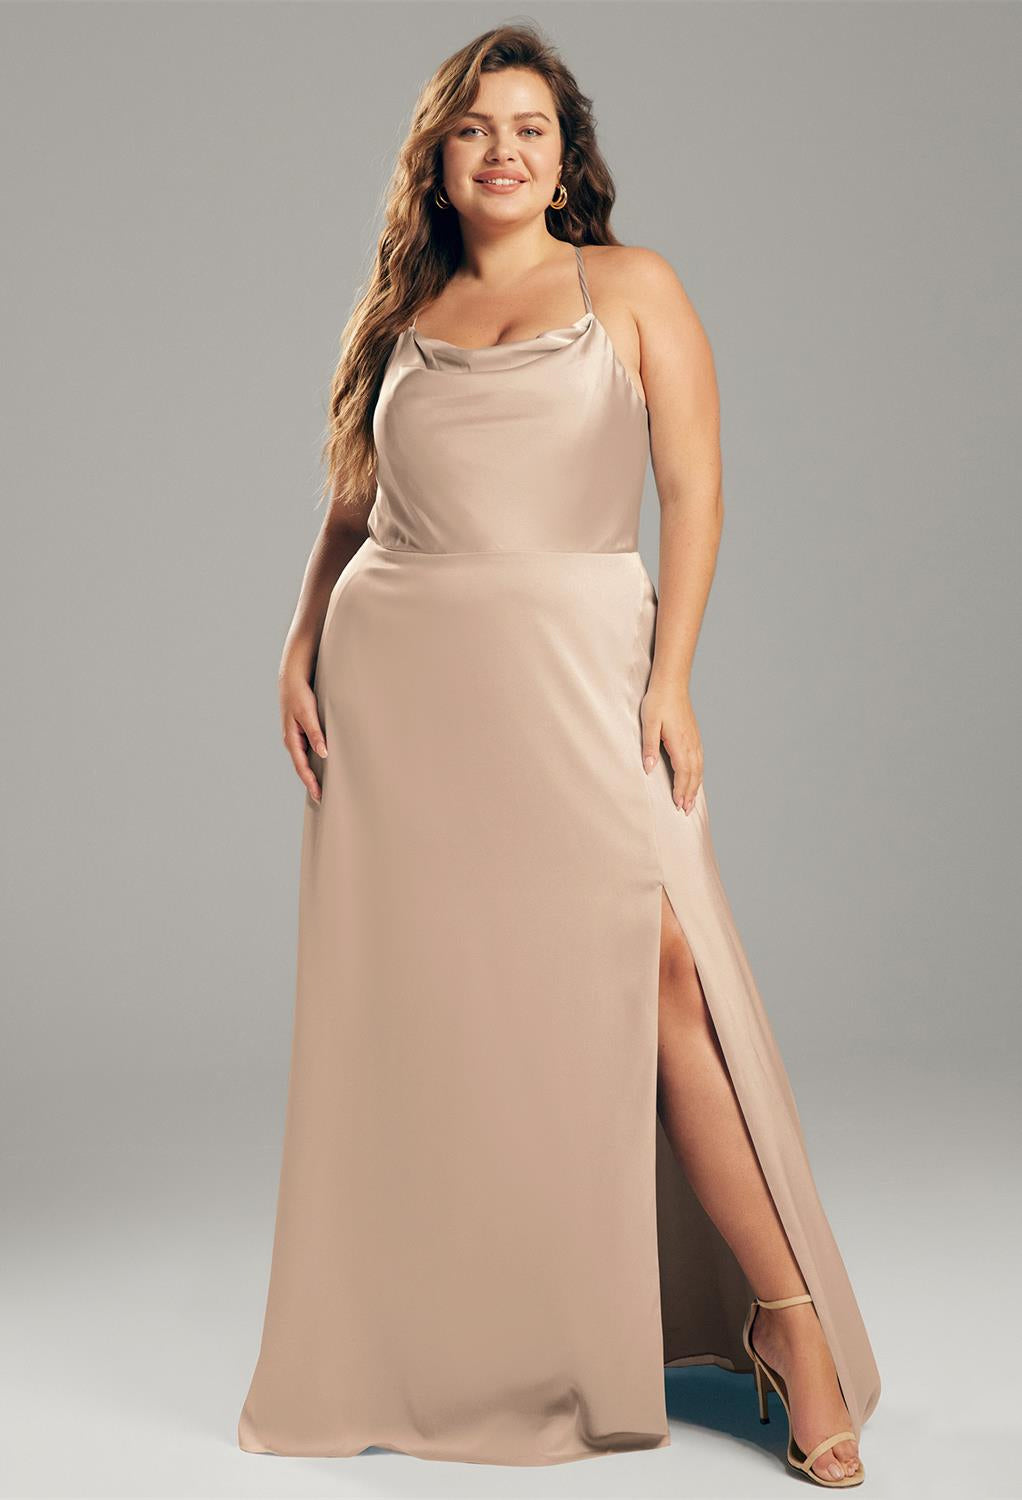 A plus size woman in a Kora - Satin Charmeuse Bridesmaid Dress - Off The Rack from Bergamot Bridal.